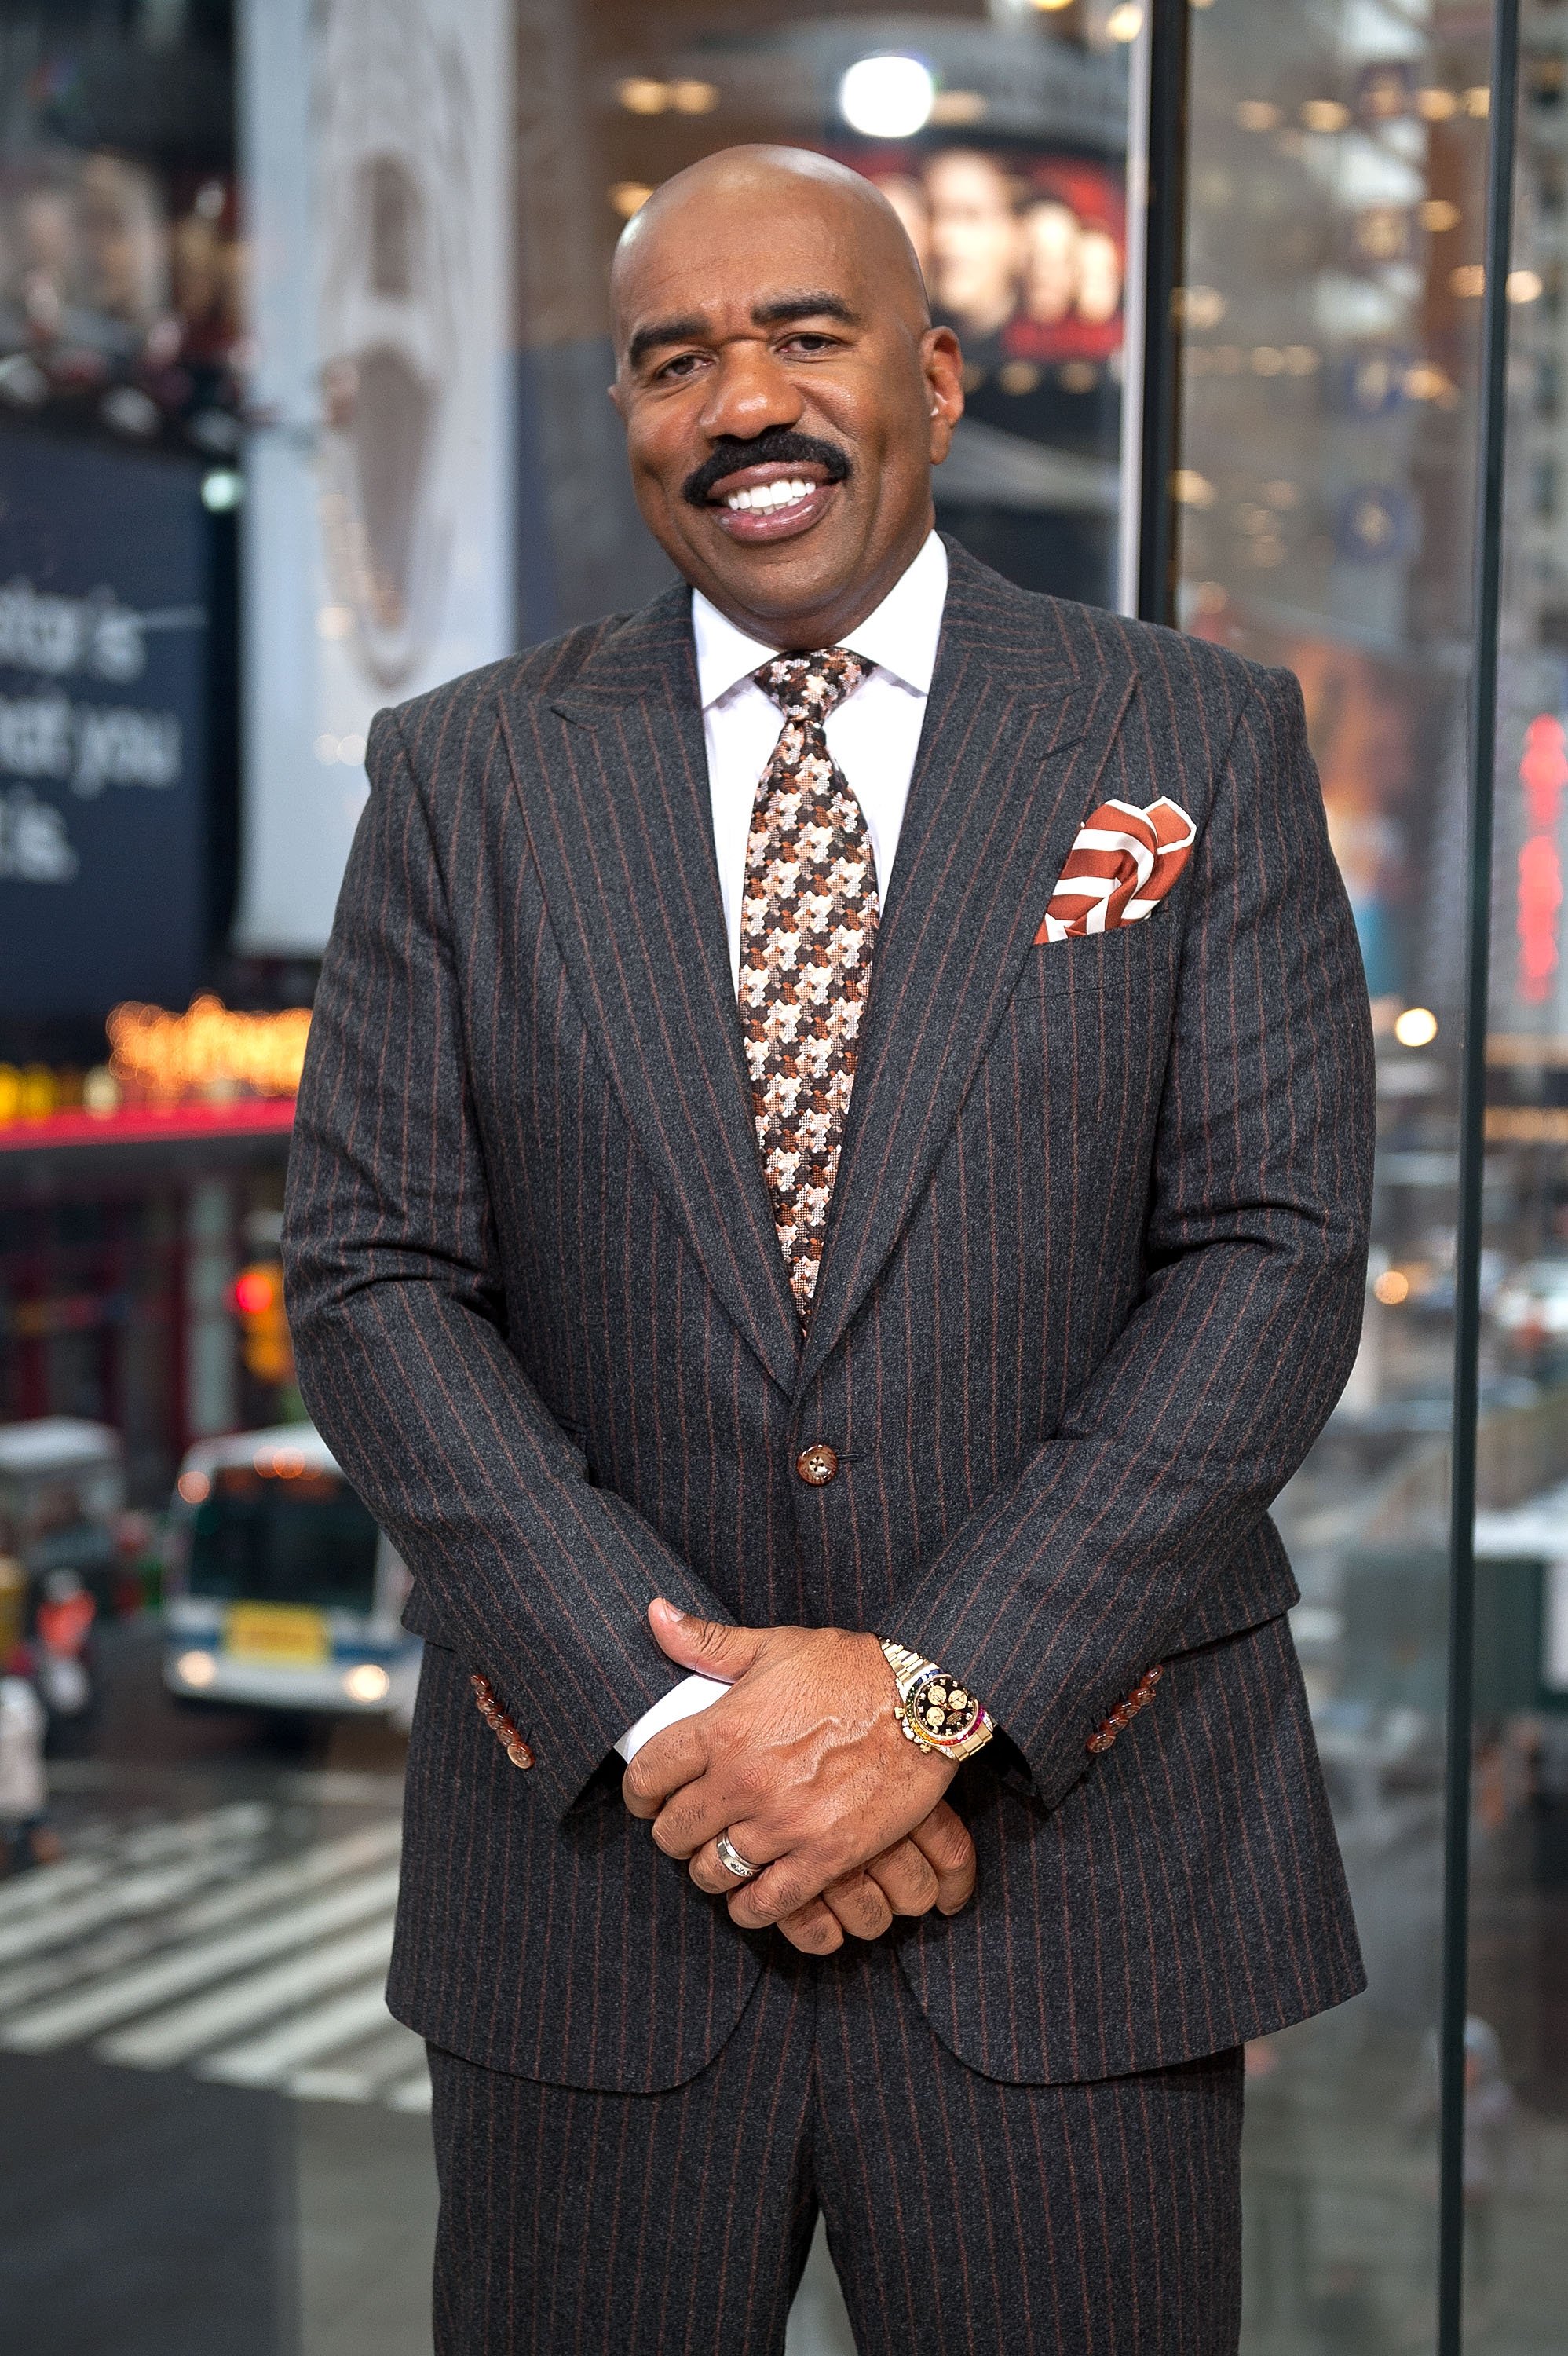 Steve Harvey smiles at the "Extra" at their New York studios at H&M in Times Square on February 9, 2015 in New York City. | Source: Getty Images